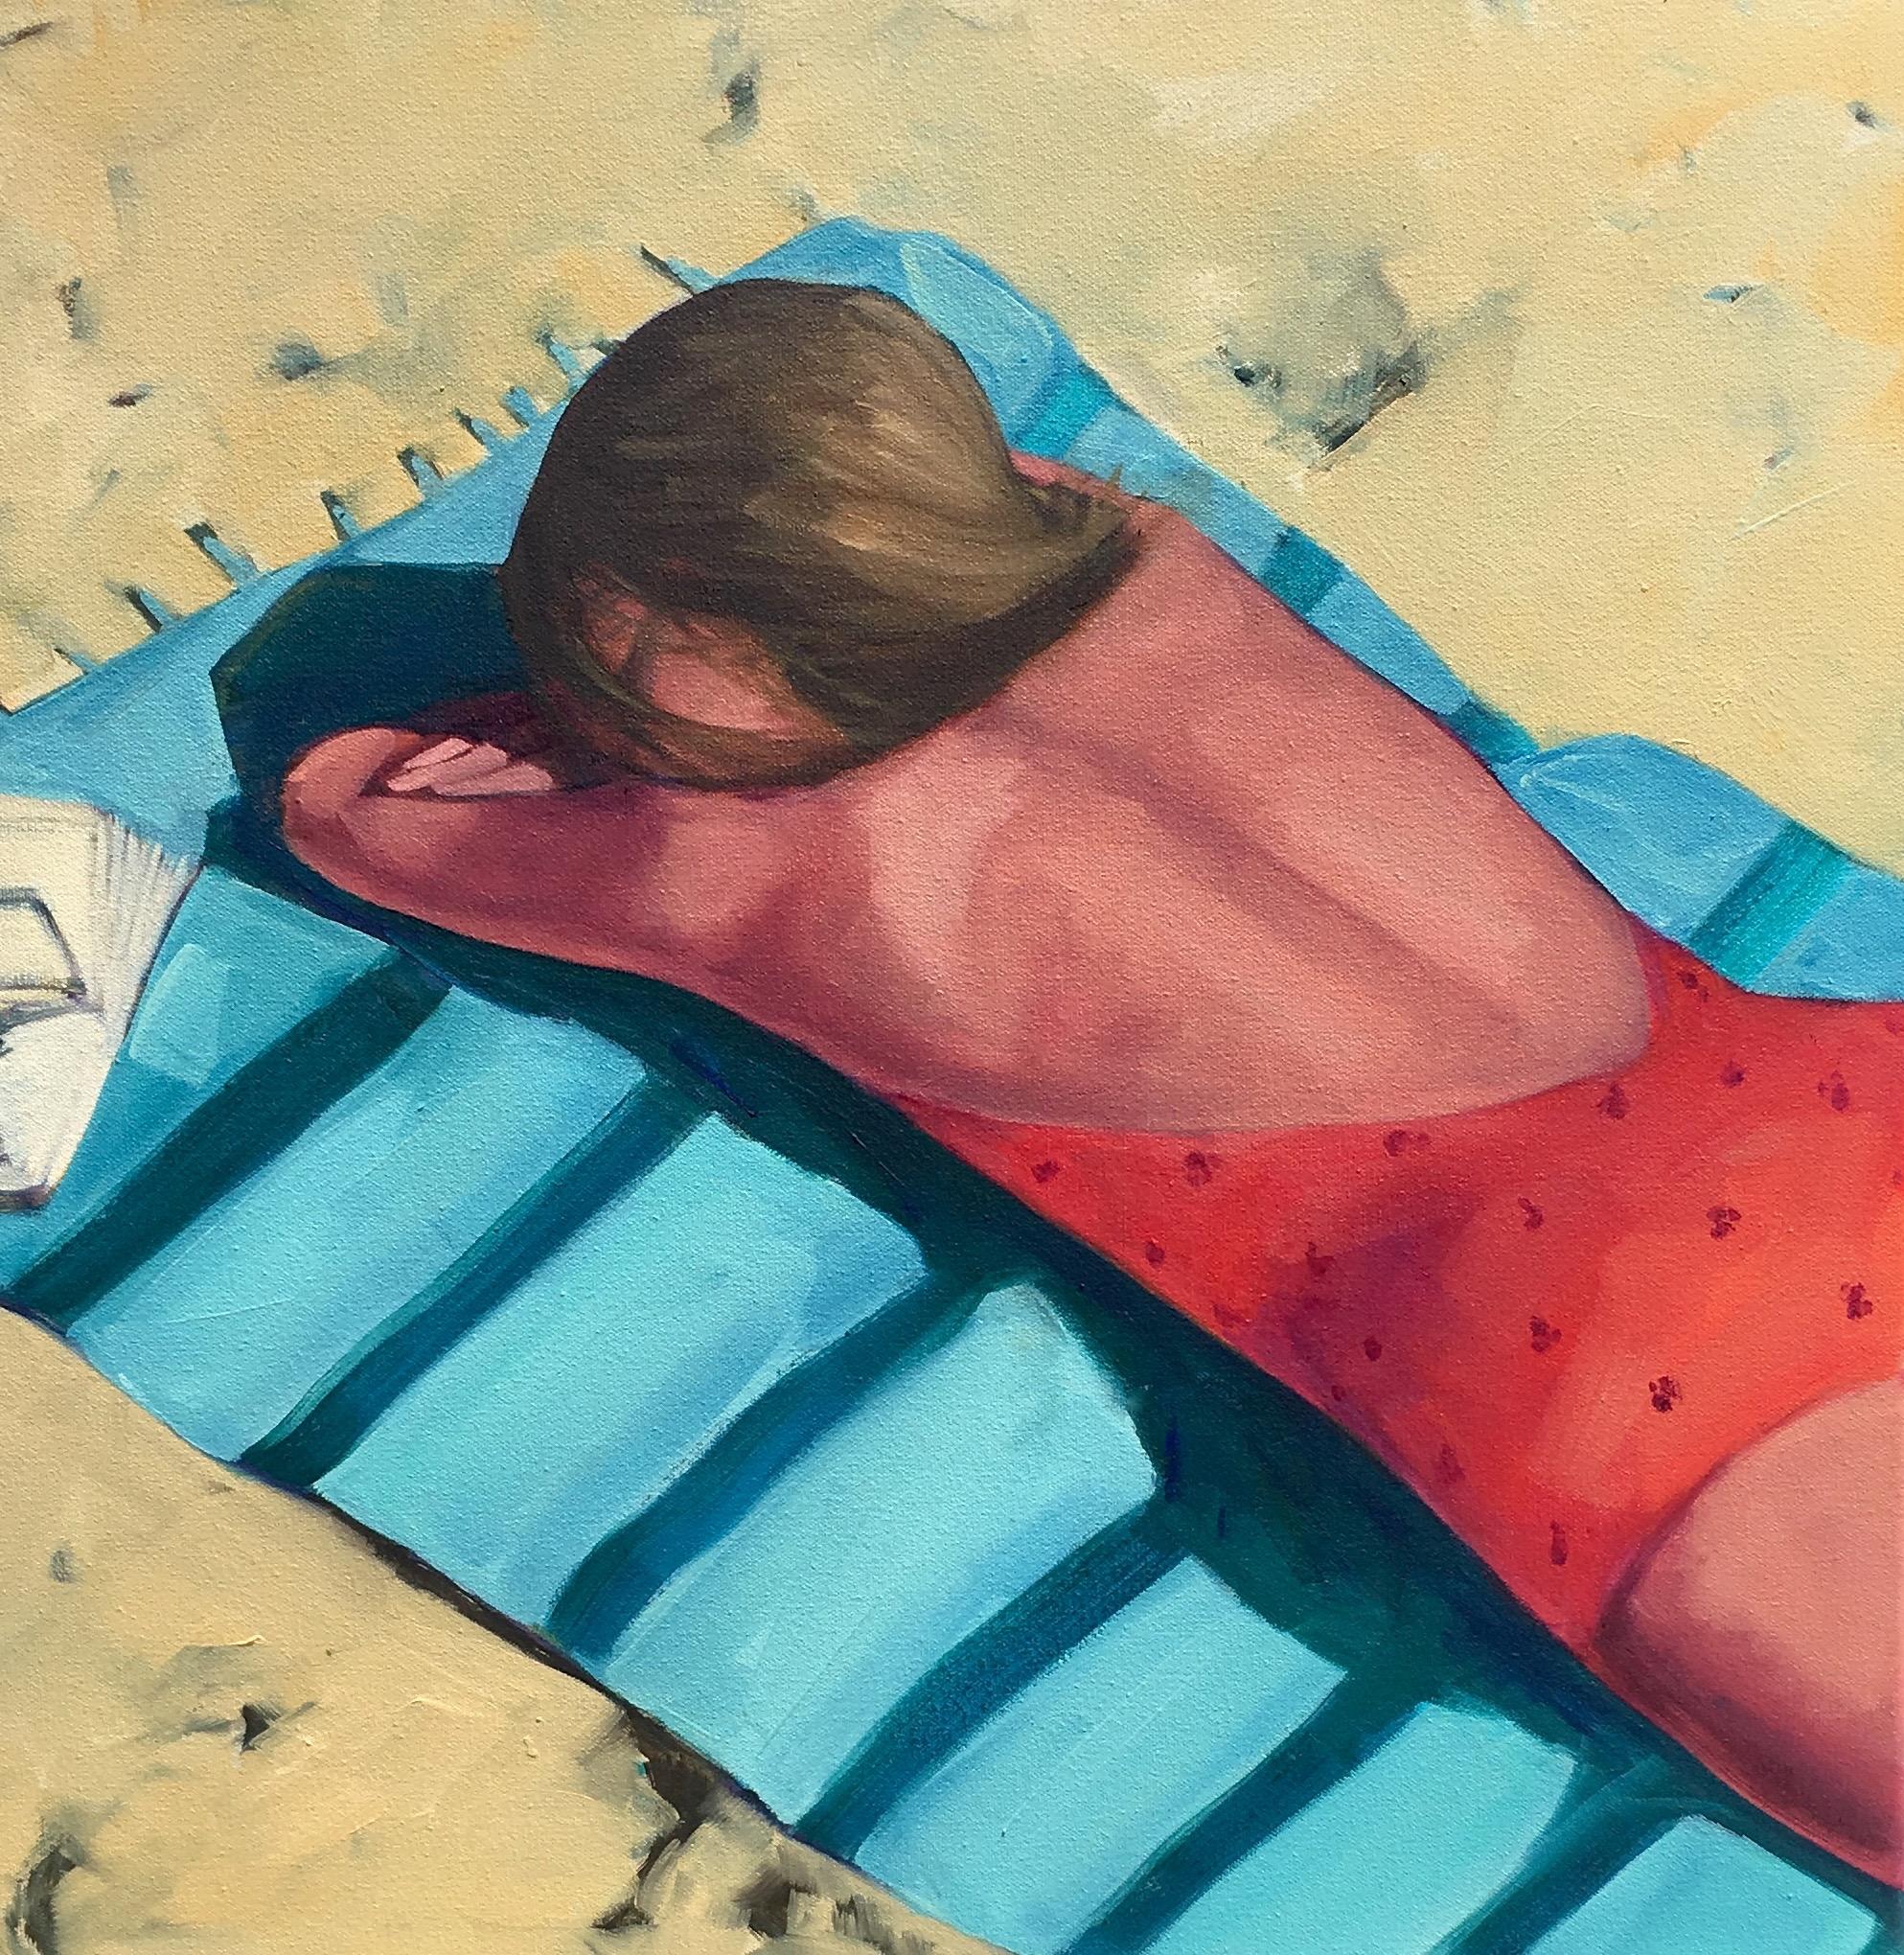 T.S. Harris Figurative Painting - "Beach Day" Brightly Colored Painting of a Woman Relaxing on a Towel on the Sand